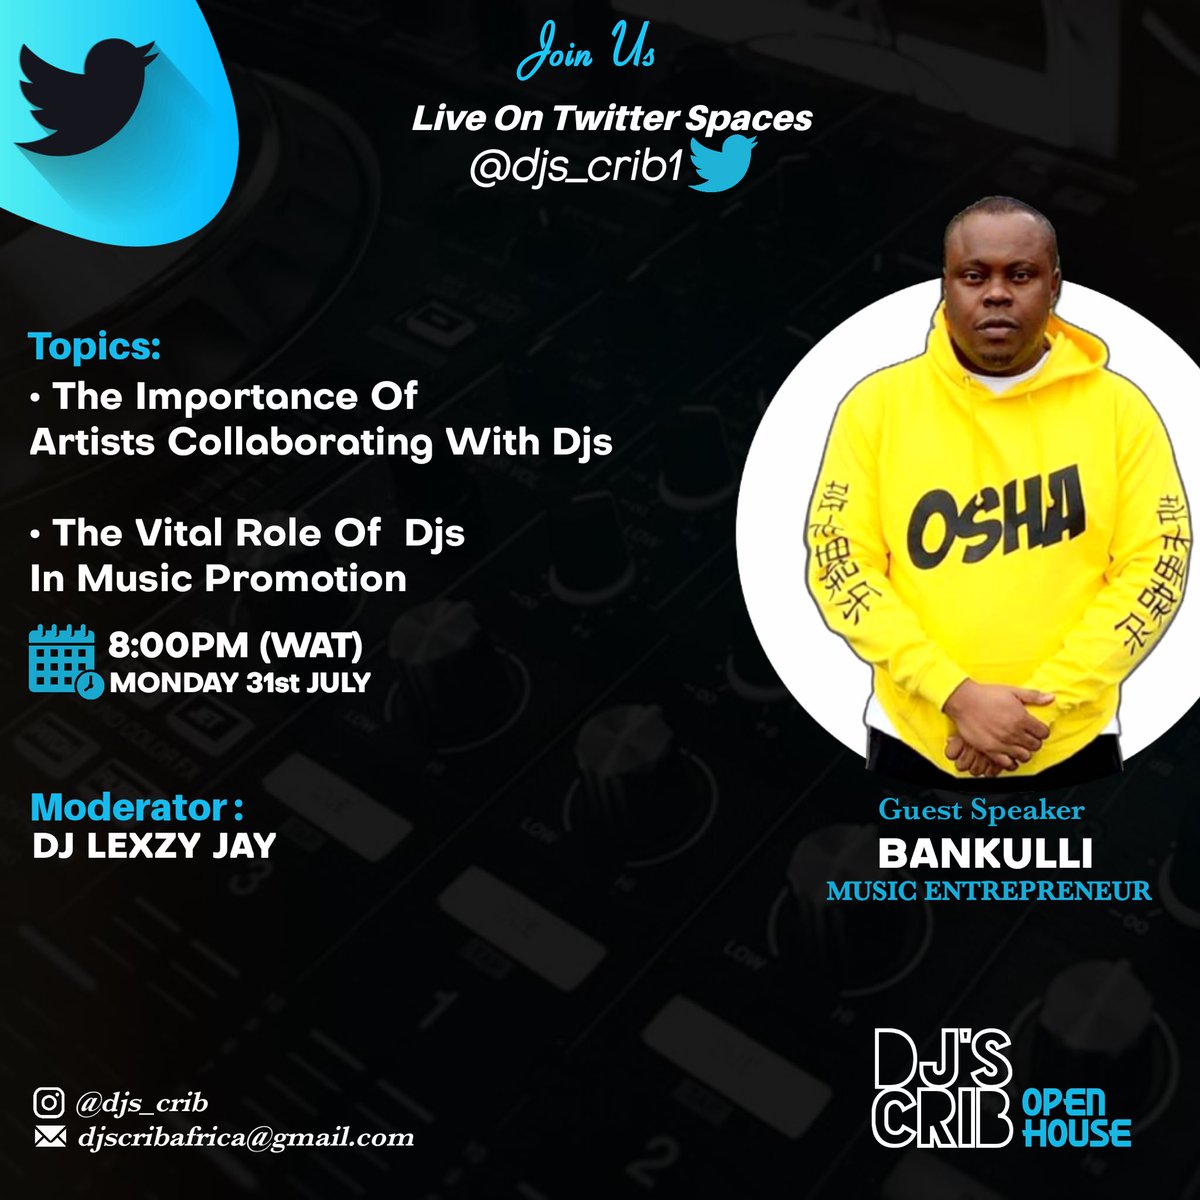 Join us Live on Twitter spaces as we having one of Africa’s top music entrepreneur @bankulli as our special guest on 31st July 2023 | 8:00PM.

DJs Turn up with your Questions concerning the music industry.
Meet you there ✌🏻
#djscrib #djs #nigeriandj #BBNaija